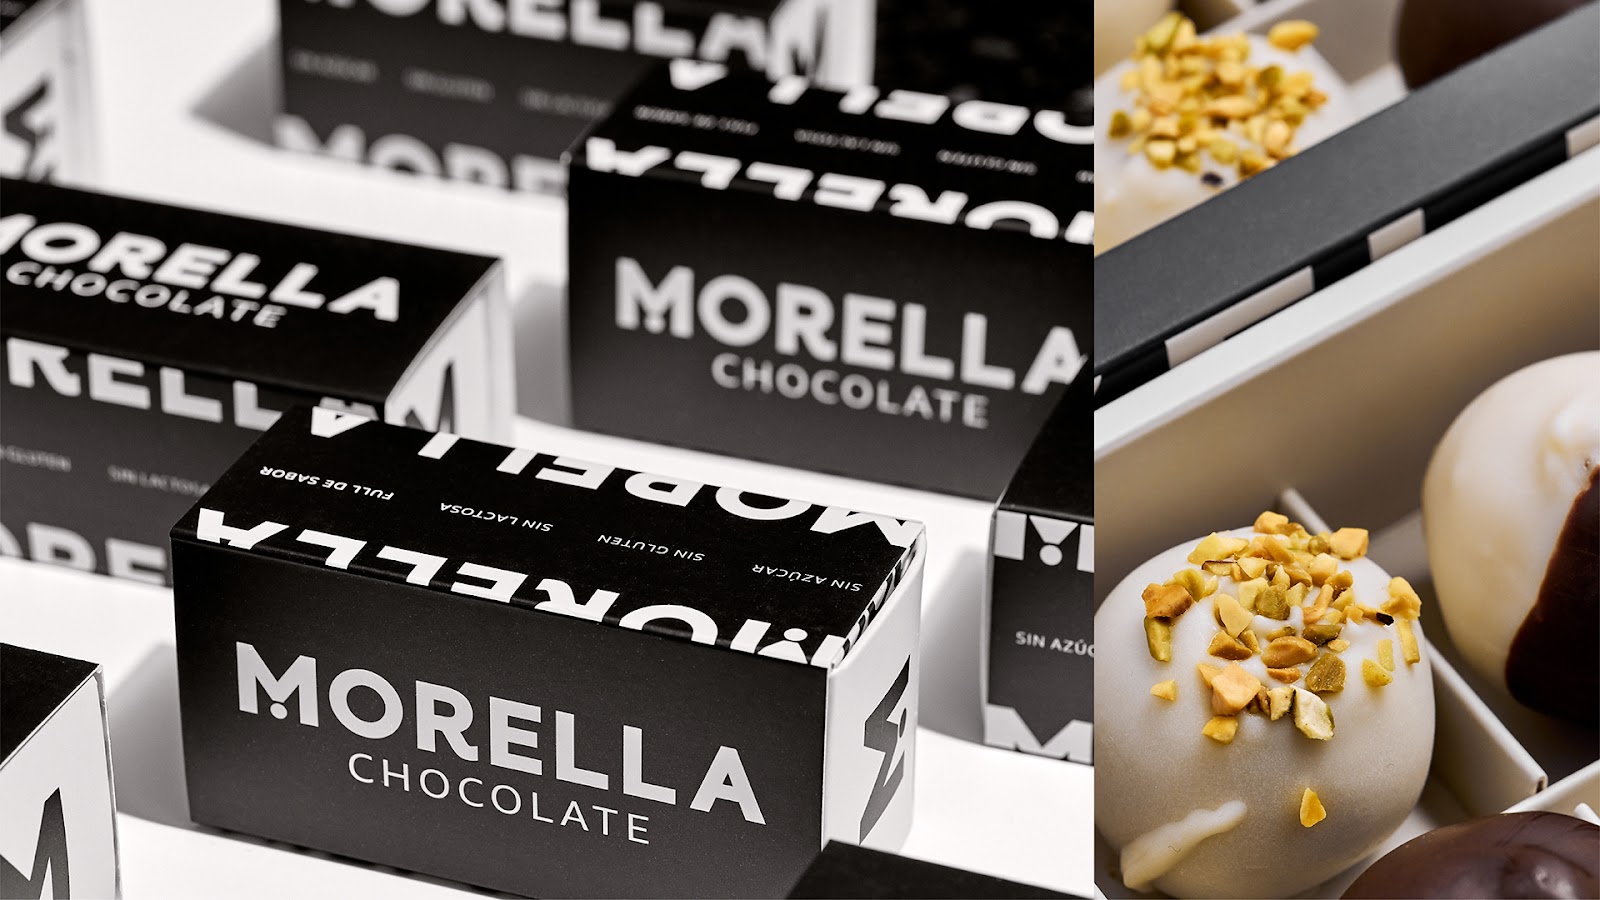 Packaging design and brand identity artifacts